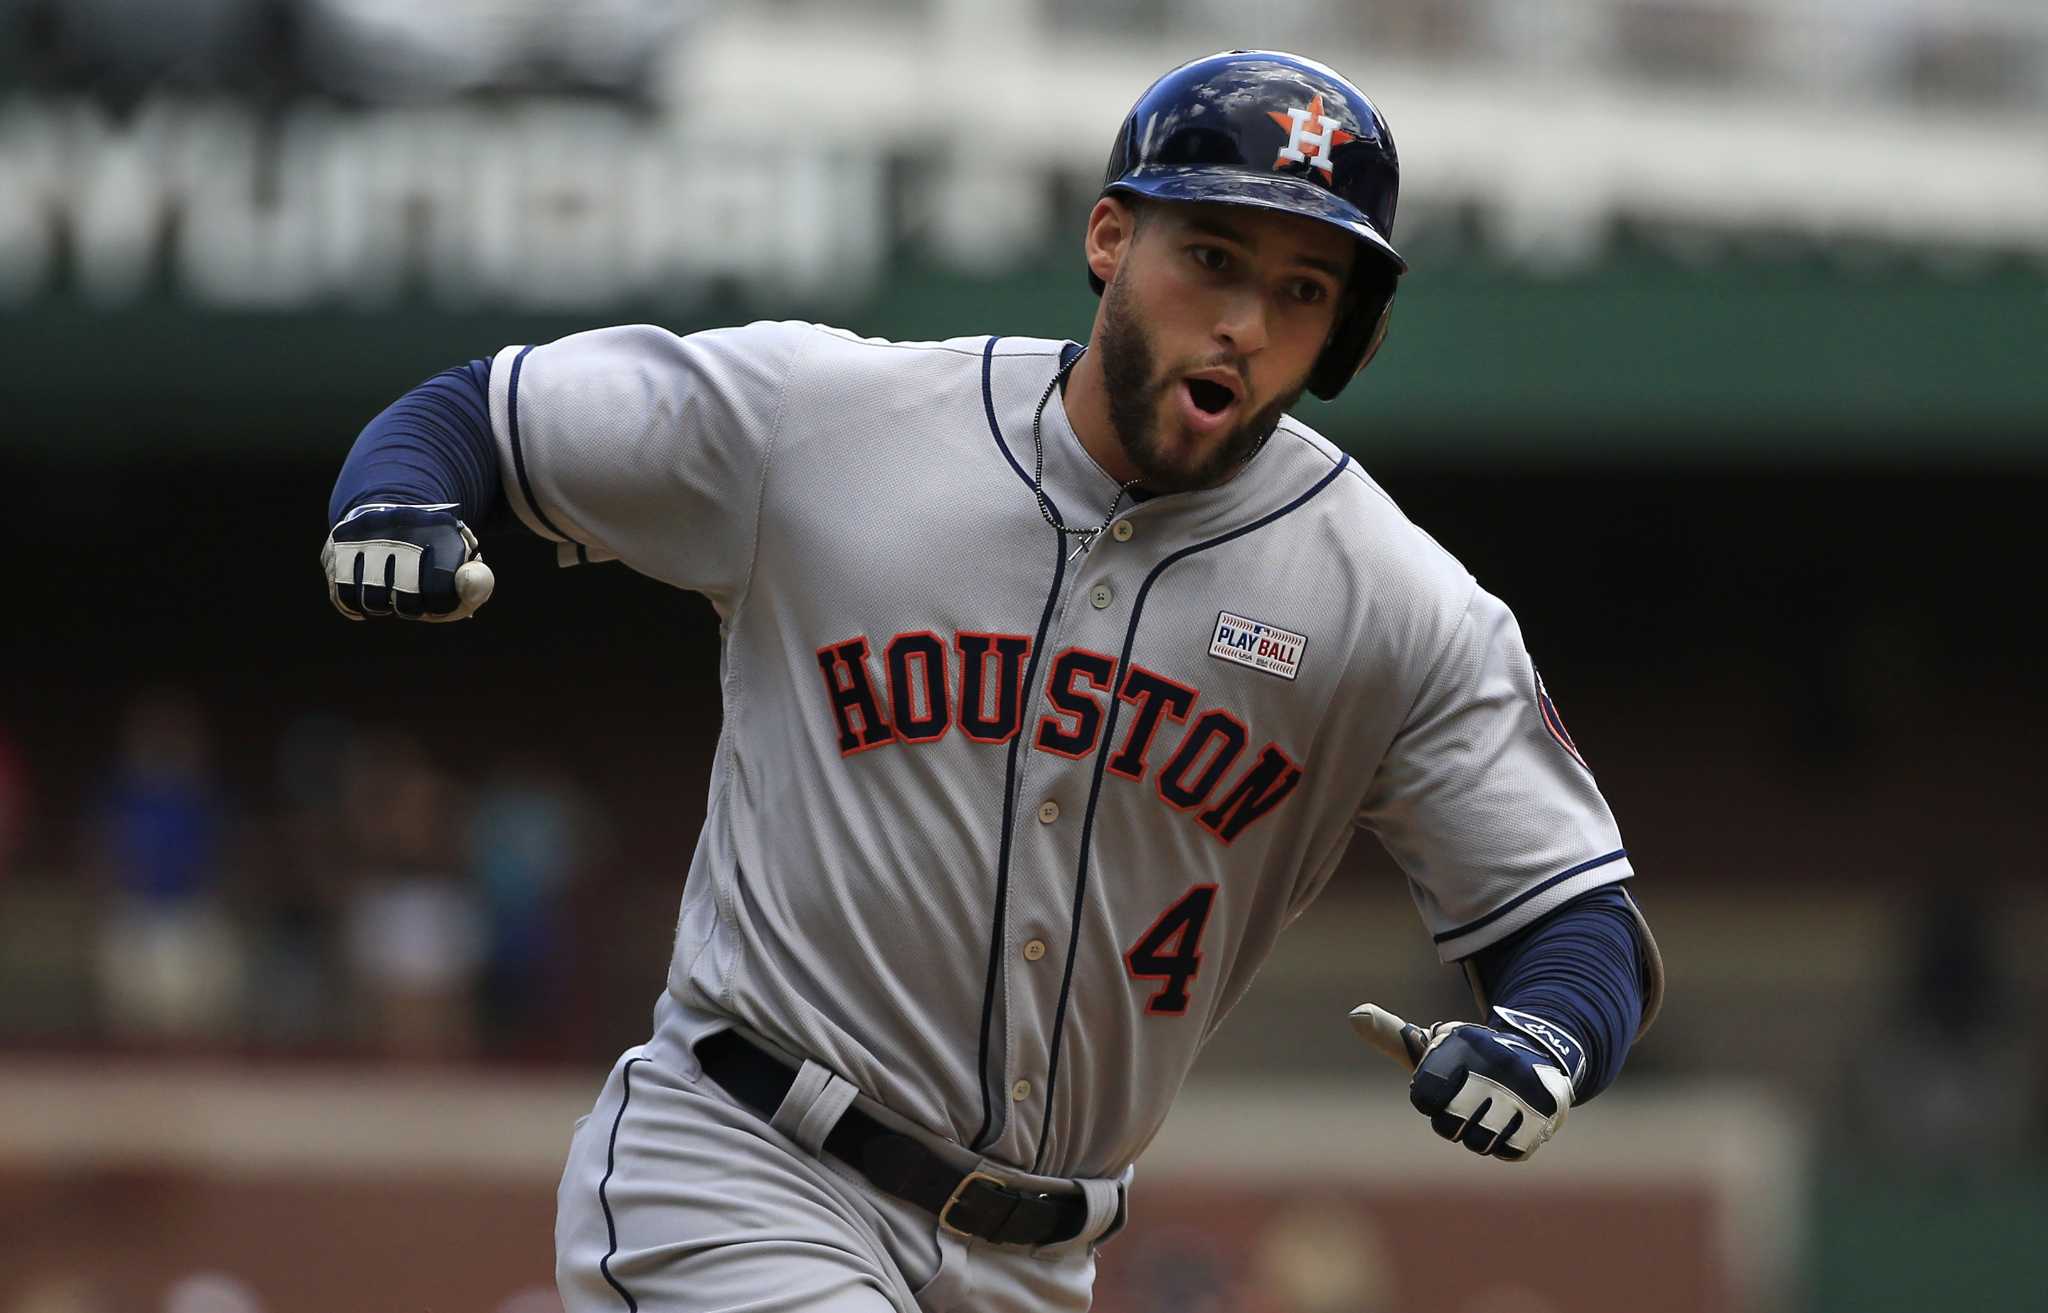 George Springer's shirt takes swing at MLB schedule-makers after Astros  forced to take red-eye - ABC13 Houston